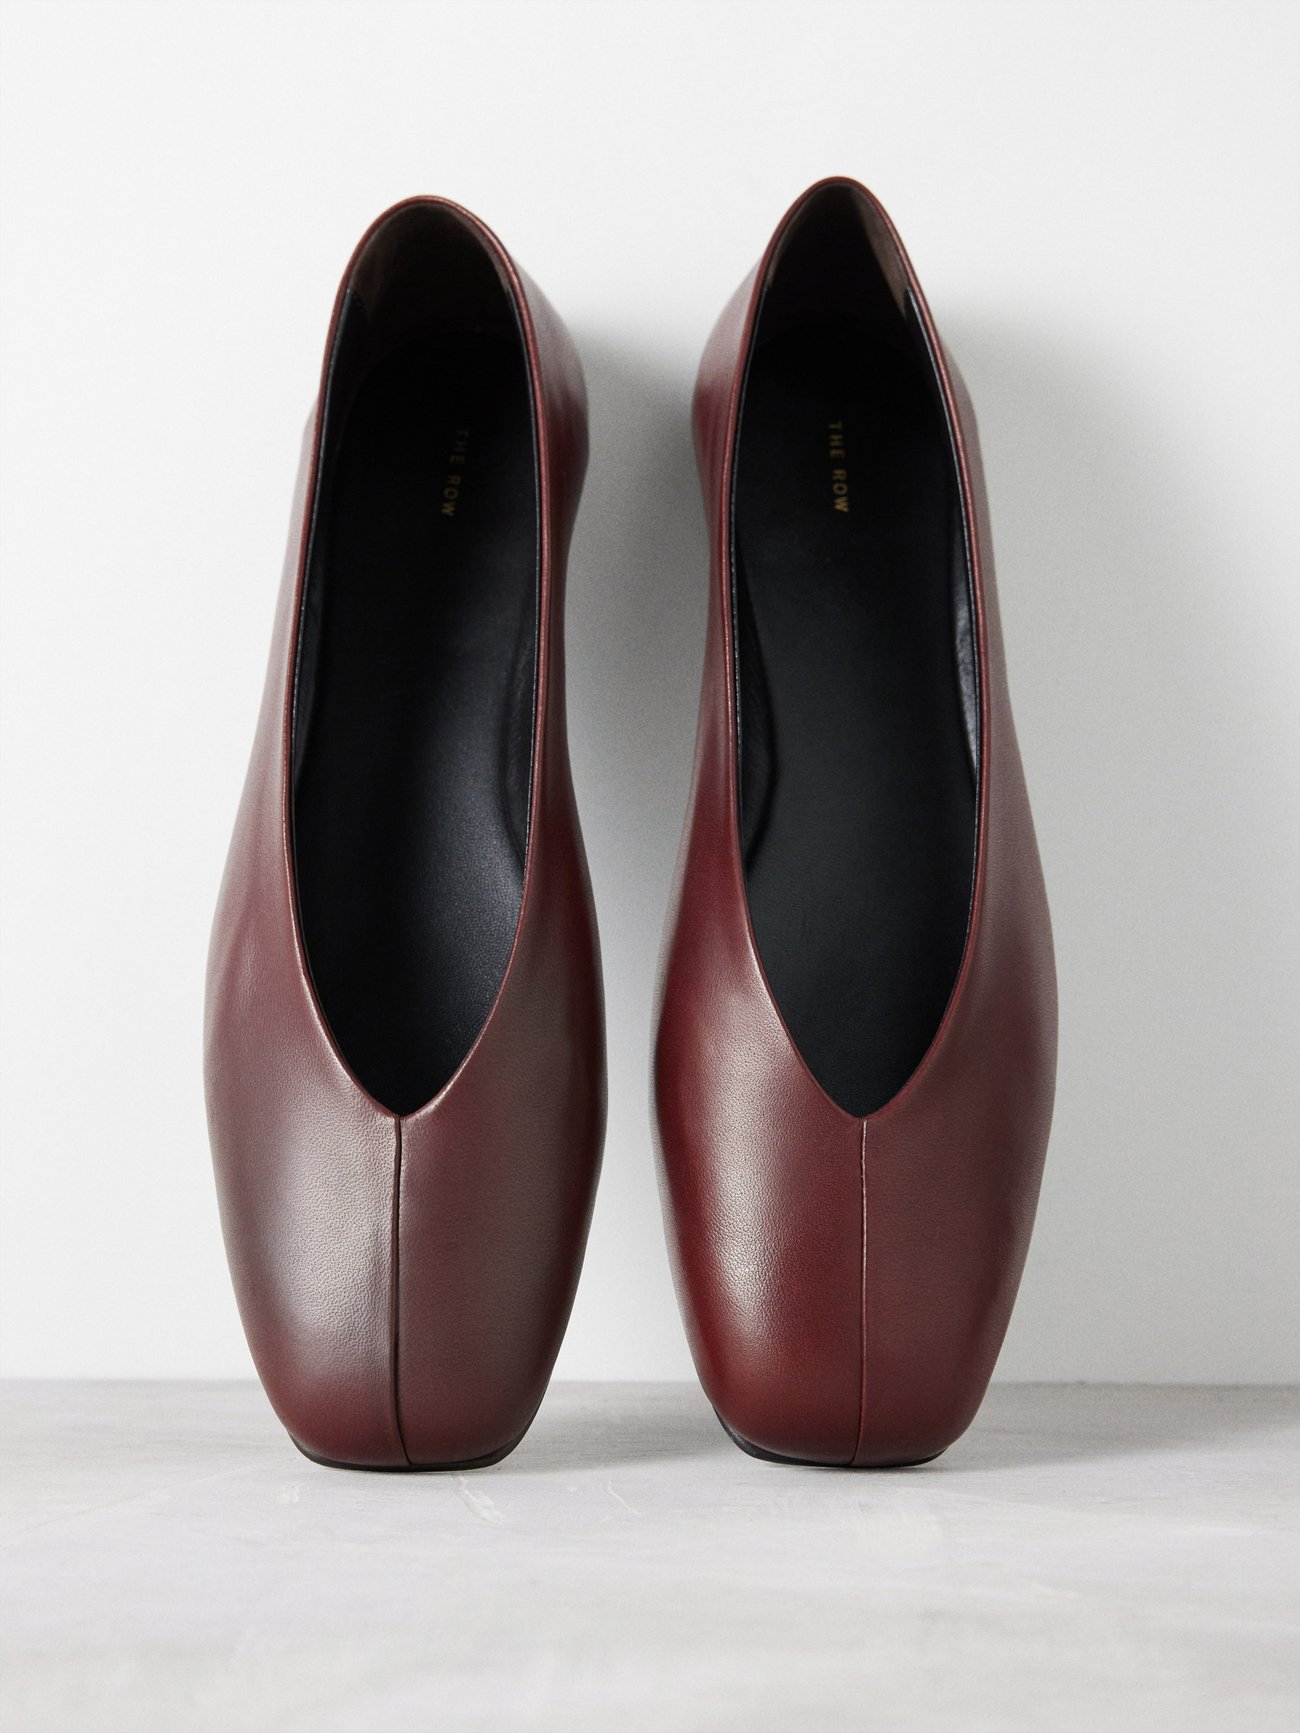 This sublime iteration of The Row’s Eva Two pumps consists of dual burgundy lambskin panels converging at the centre, set above a slender calf leather sole.